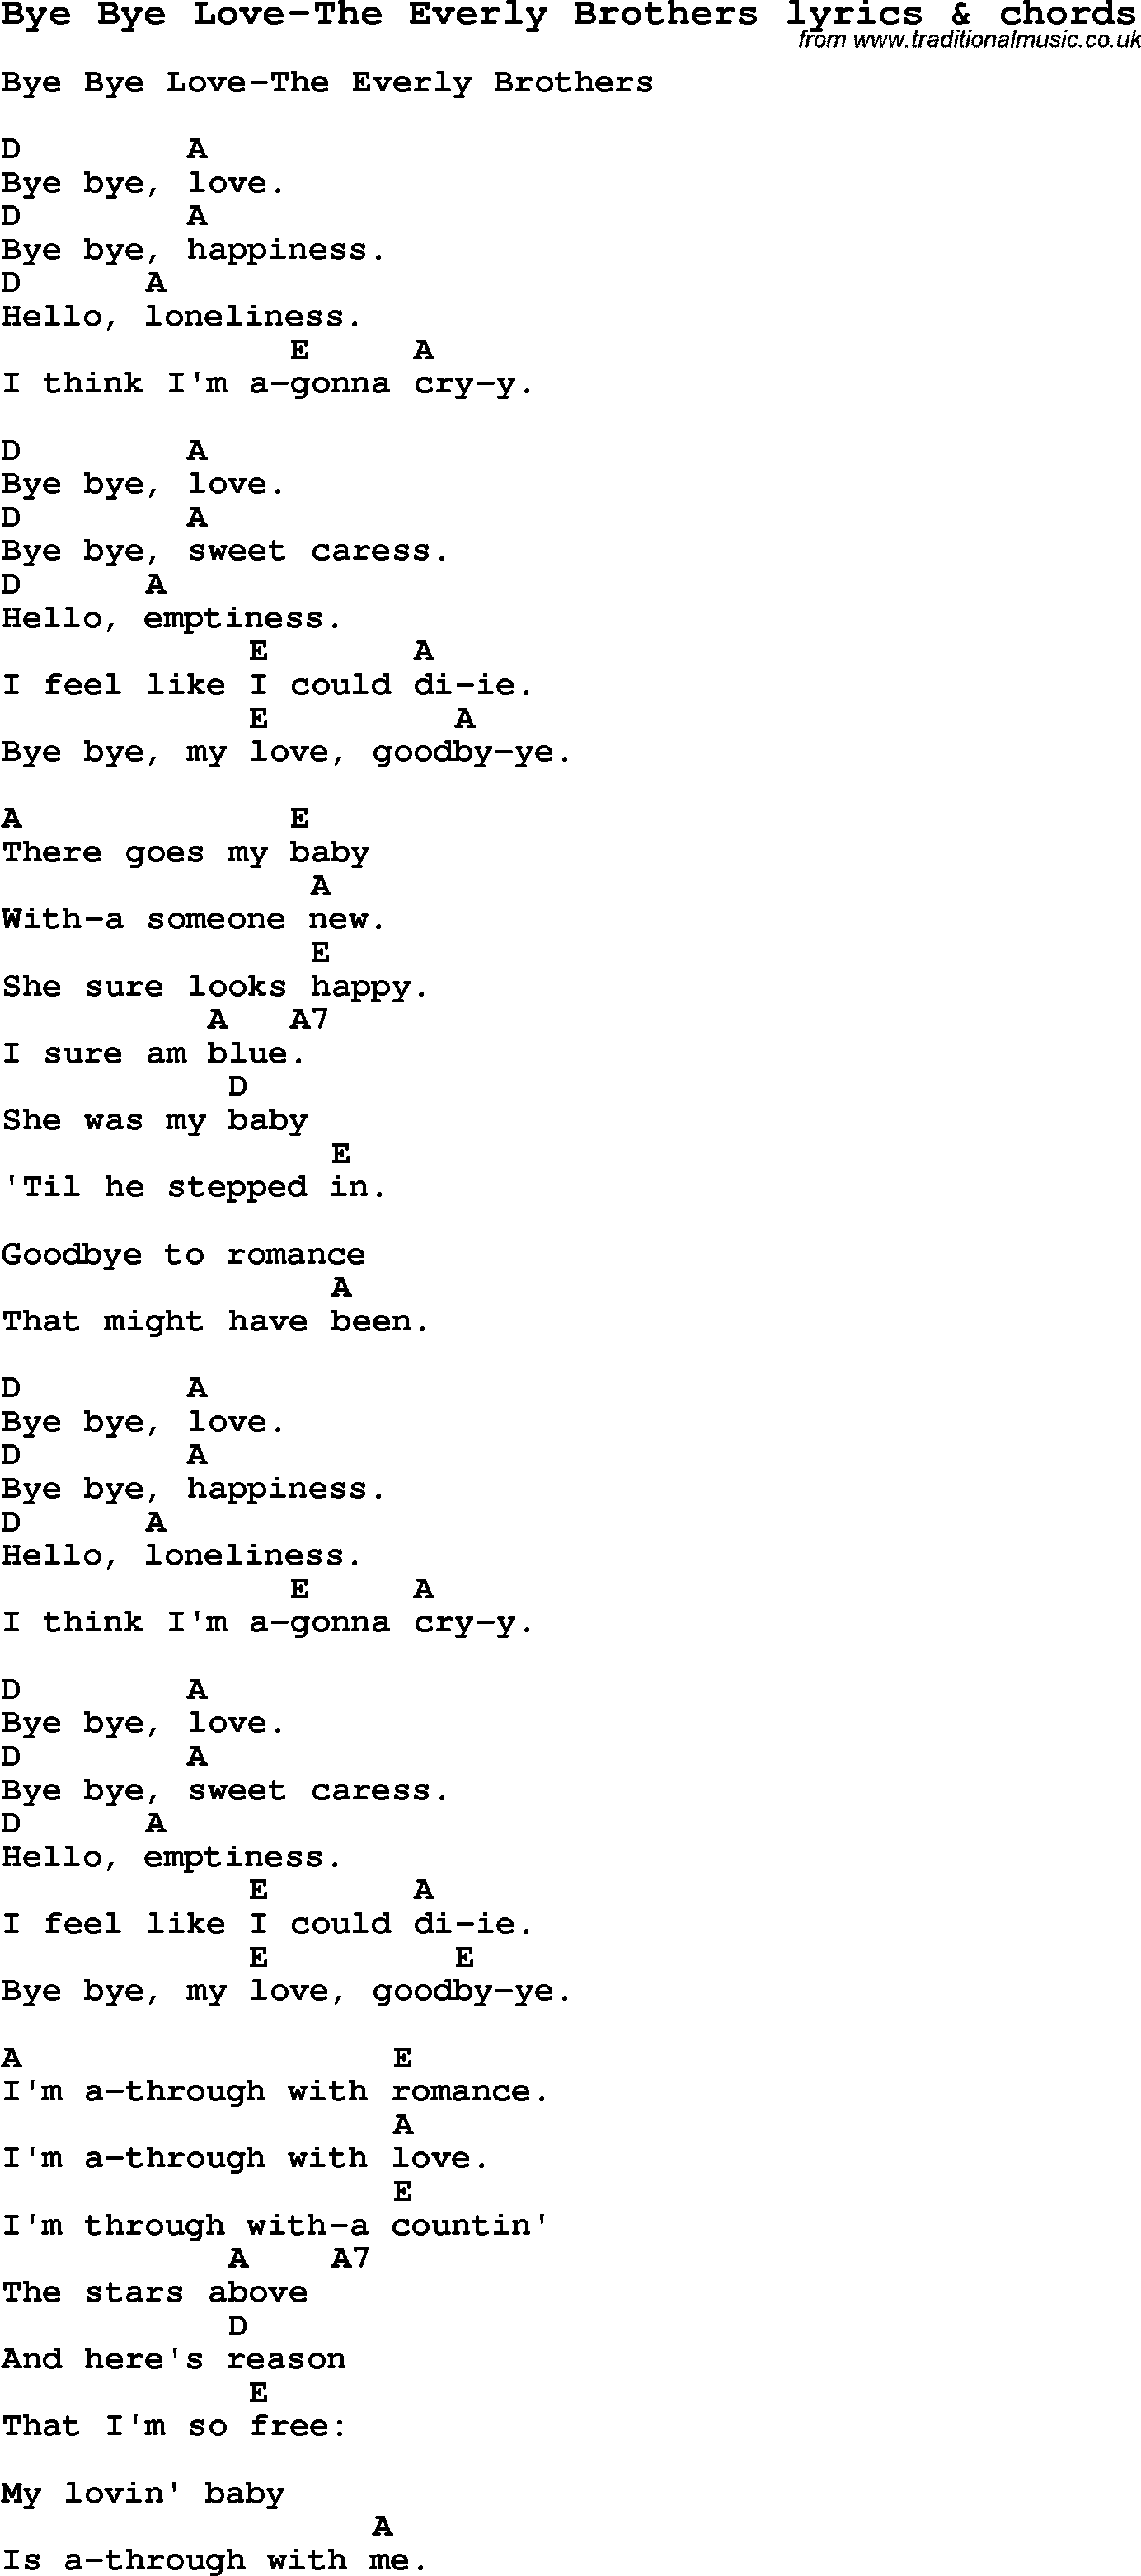 Love Song Lyrics for: Bye Bye Love-The Everly Brothers with chords for Ukulele, Guitar Banjo etc.